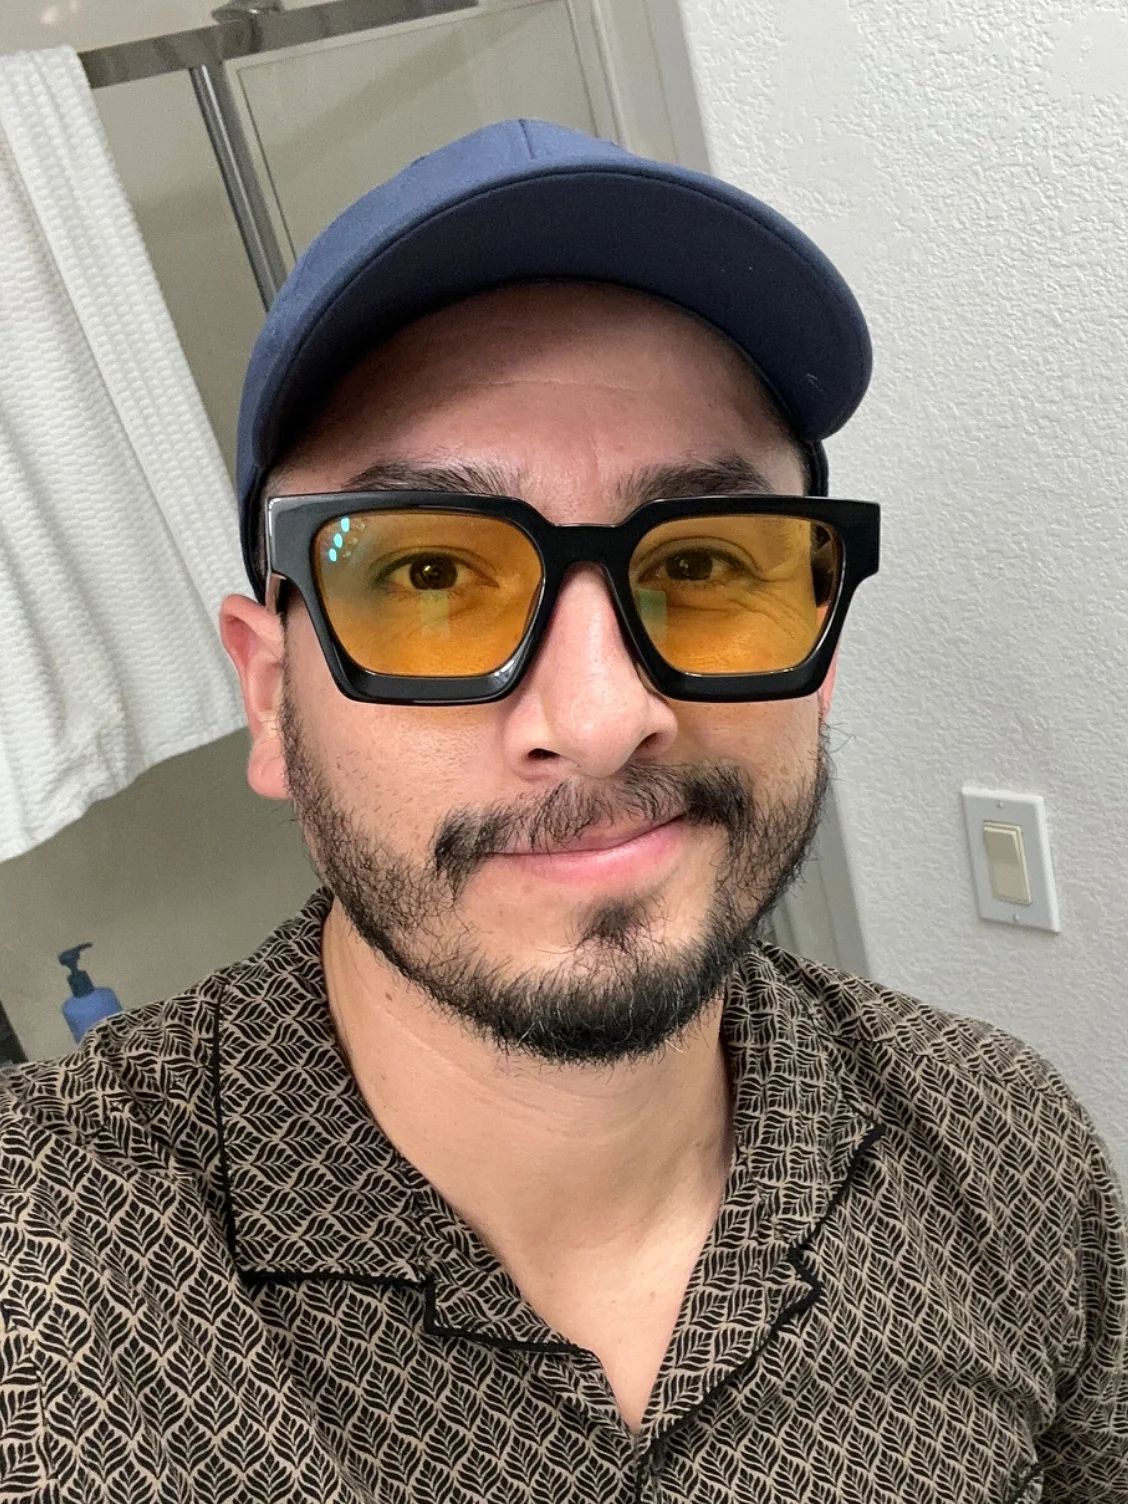 Yesglasses's review image